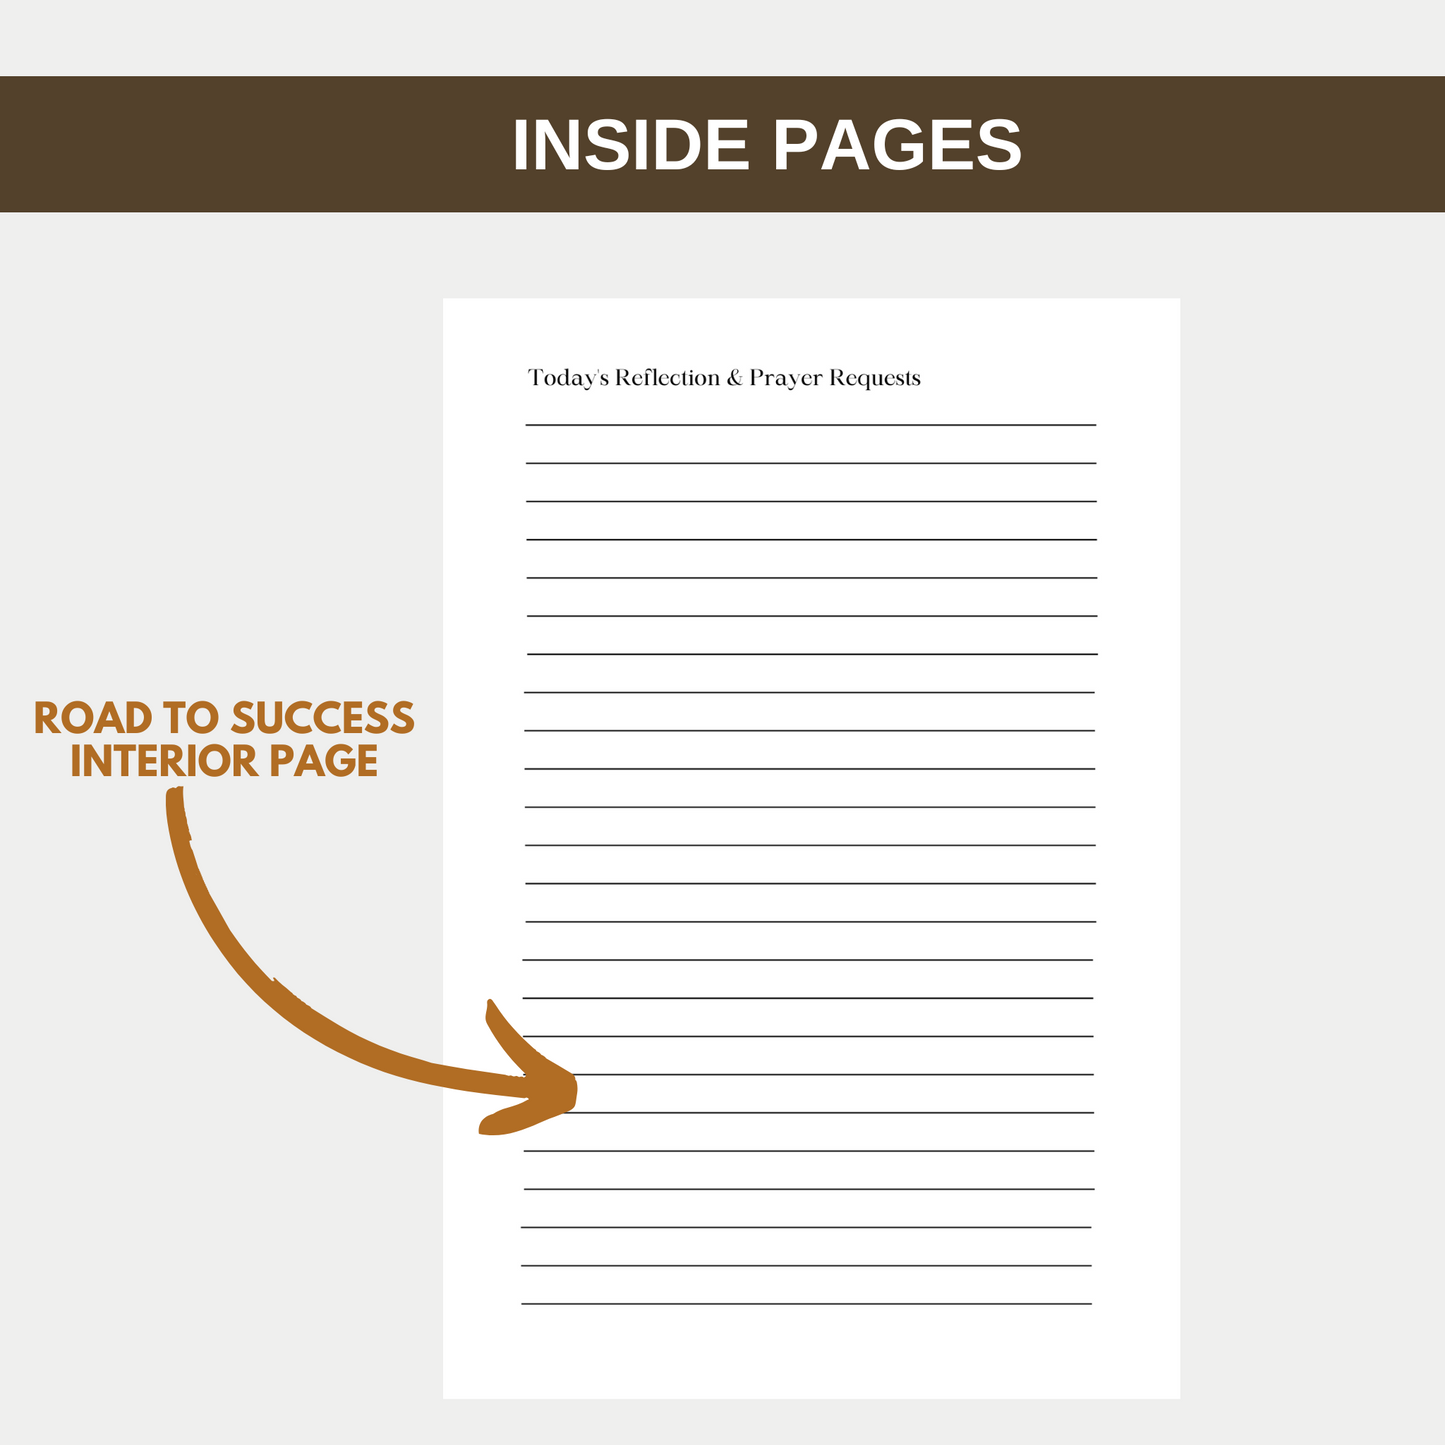 Road To Success Productivity Journal for KDP Amazon & The Book Patch